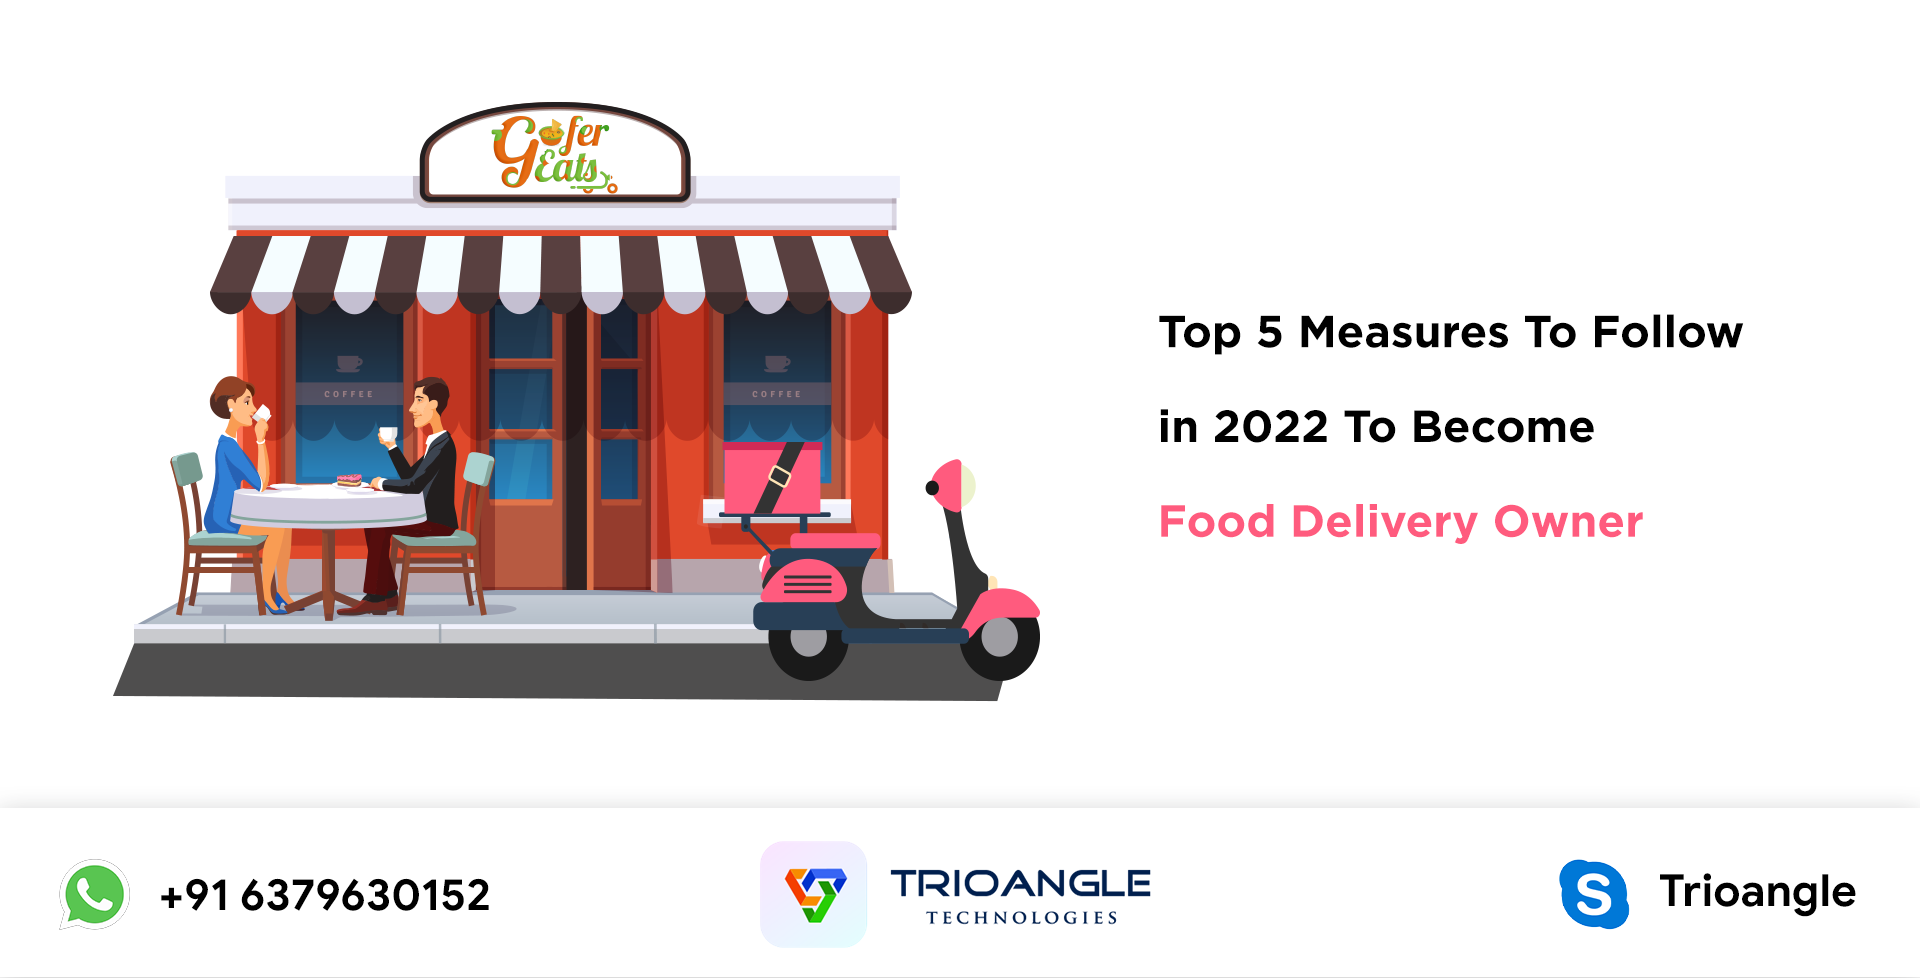 Top 5 Measures To Follow in 2022 To Become Food Delivery Owner